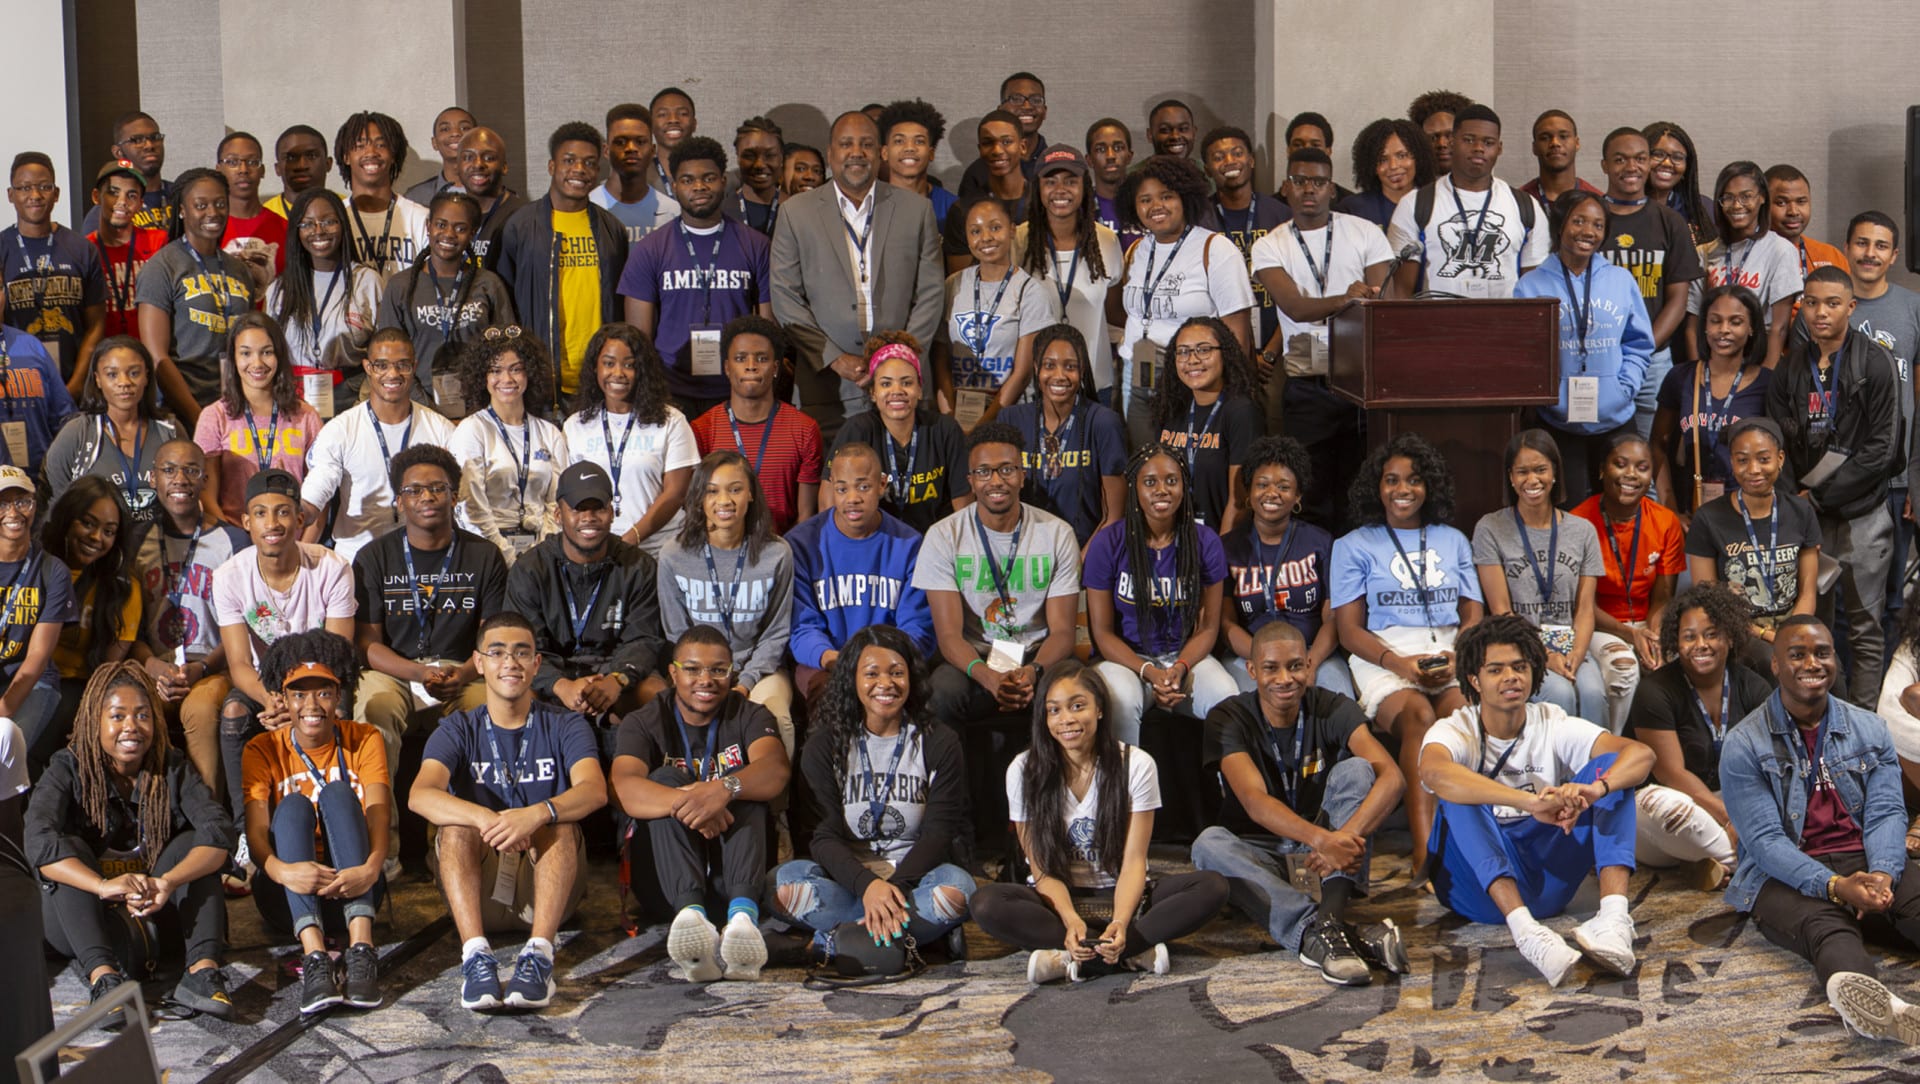 Group shot of the 2018 STEM Scholars conference attendees